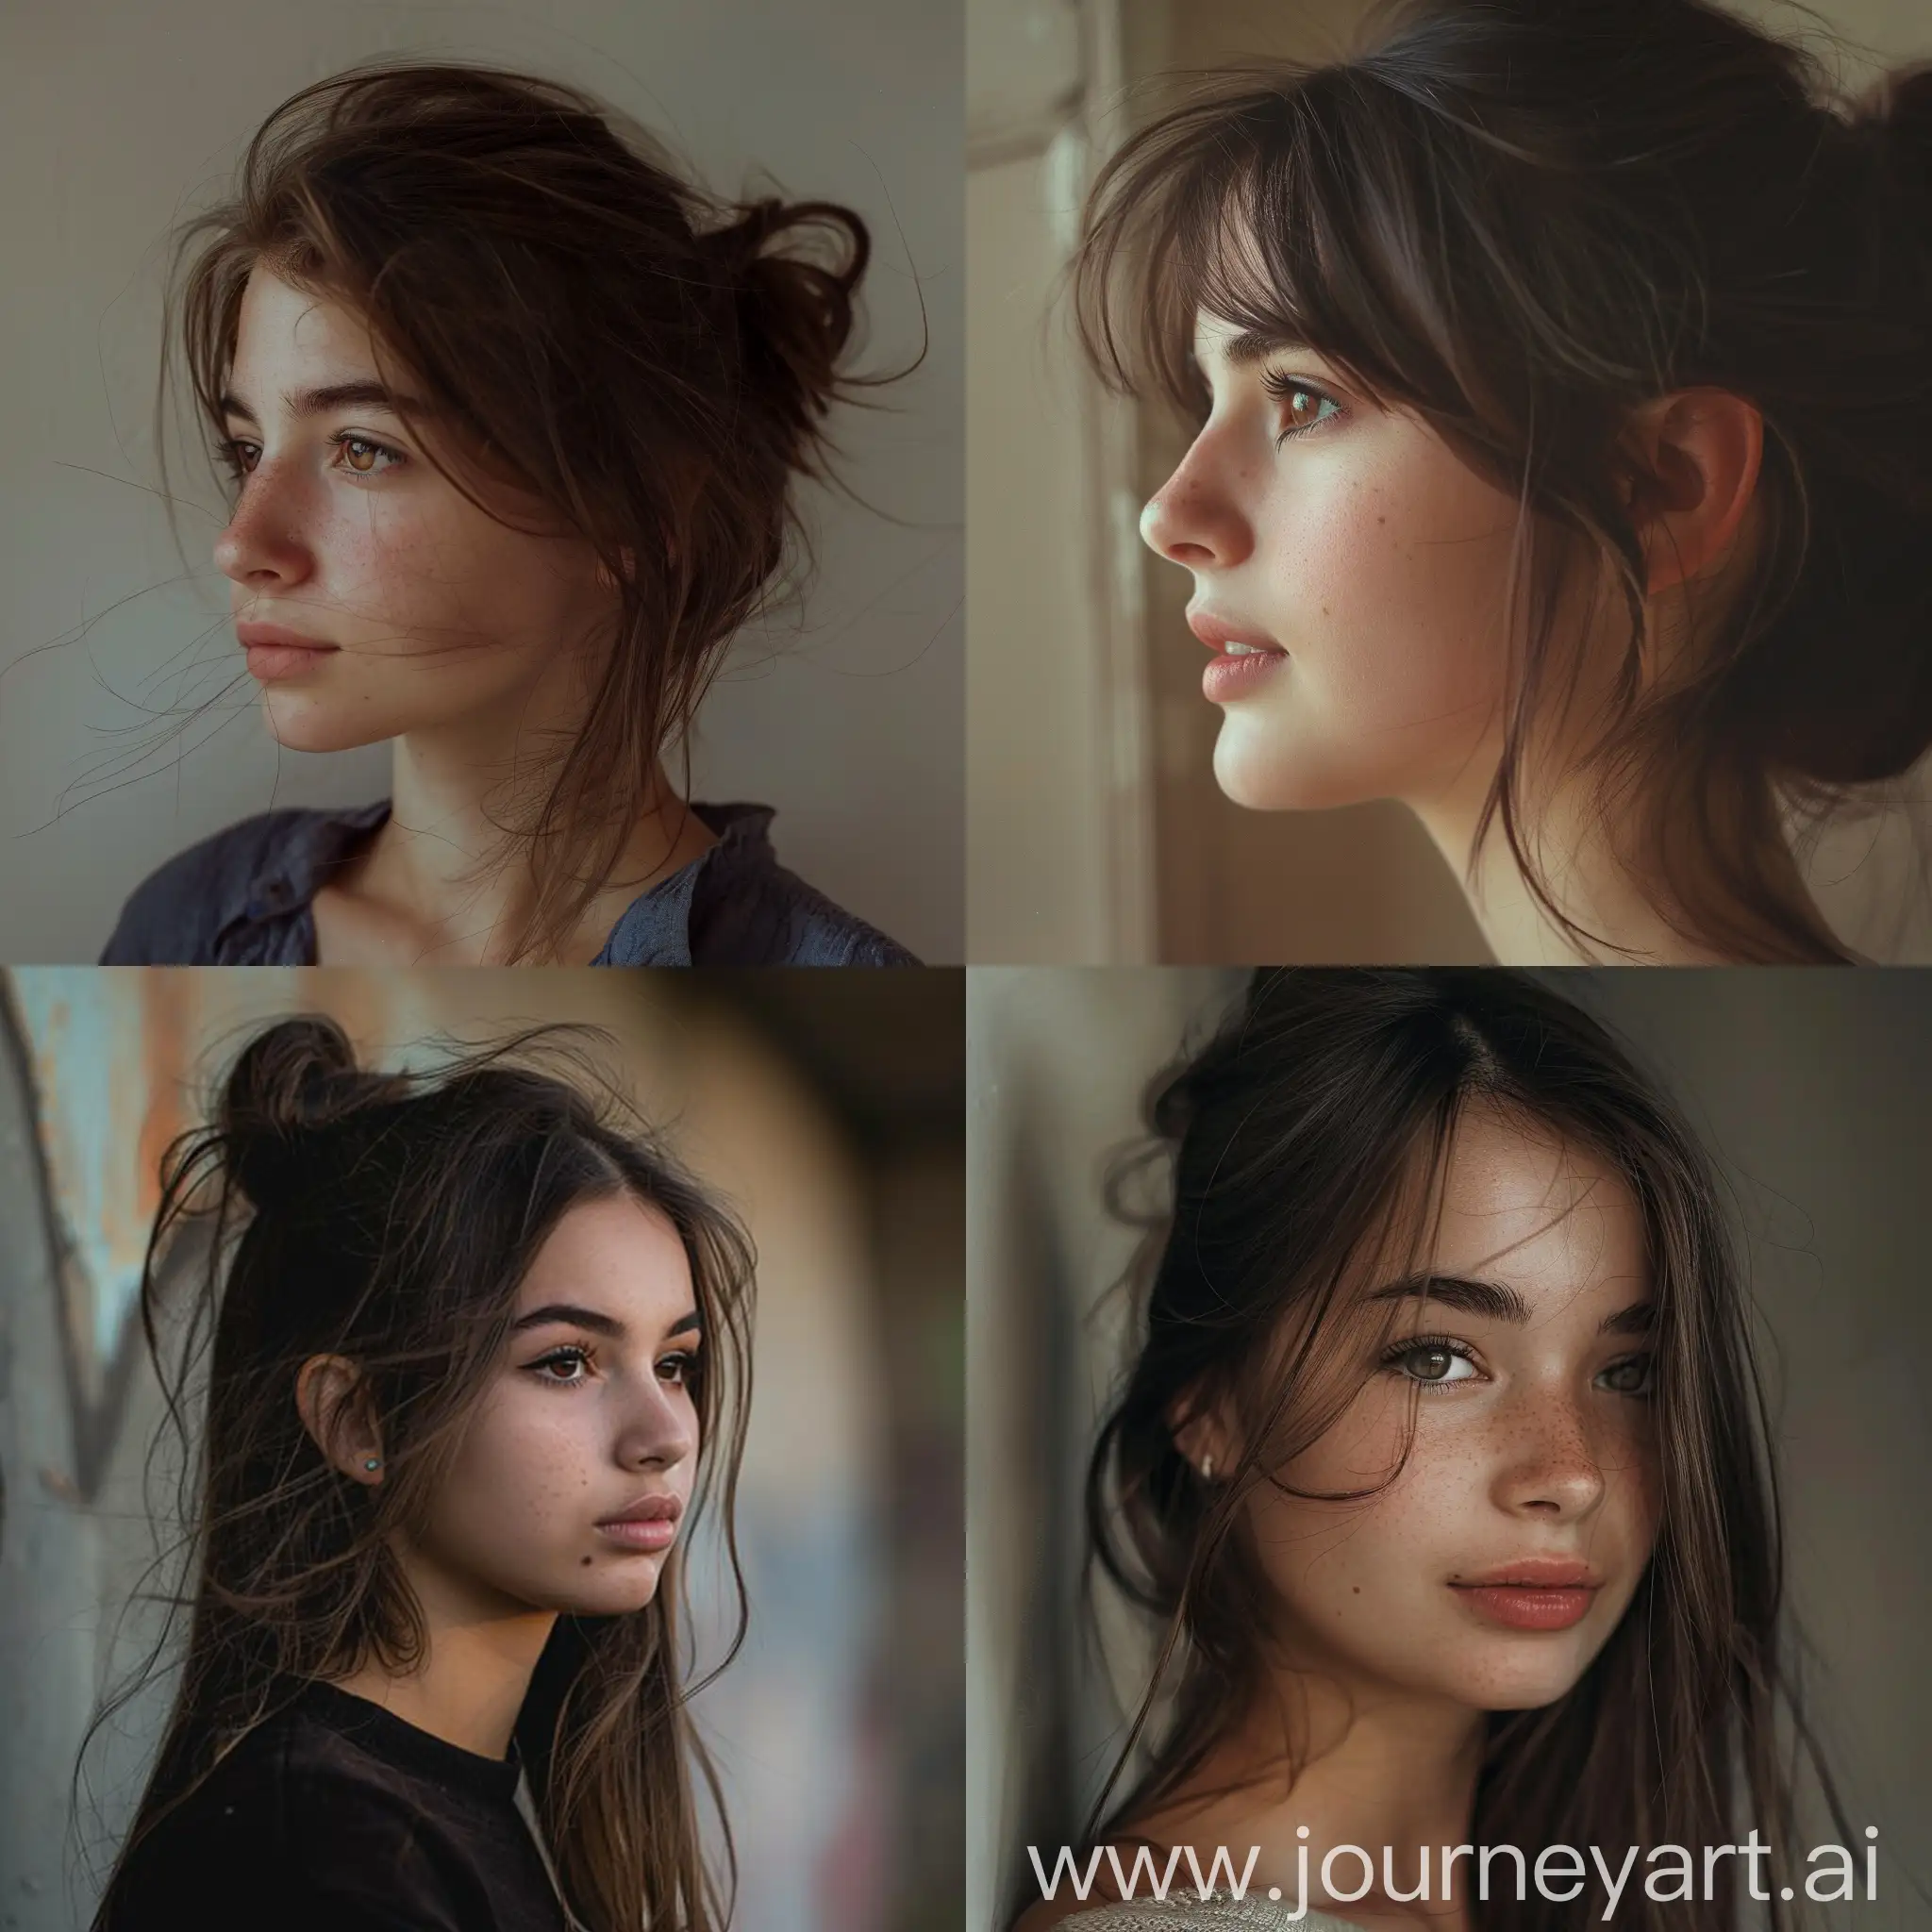 Photo of a waist-high girl in semi-profile or profile, slight smile, nose with a hunch, brown straight hair or a bundle on the head, brown eyes, artistic background, aesthetically pleasing.